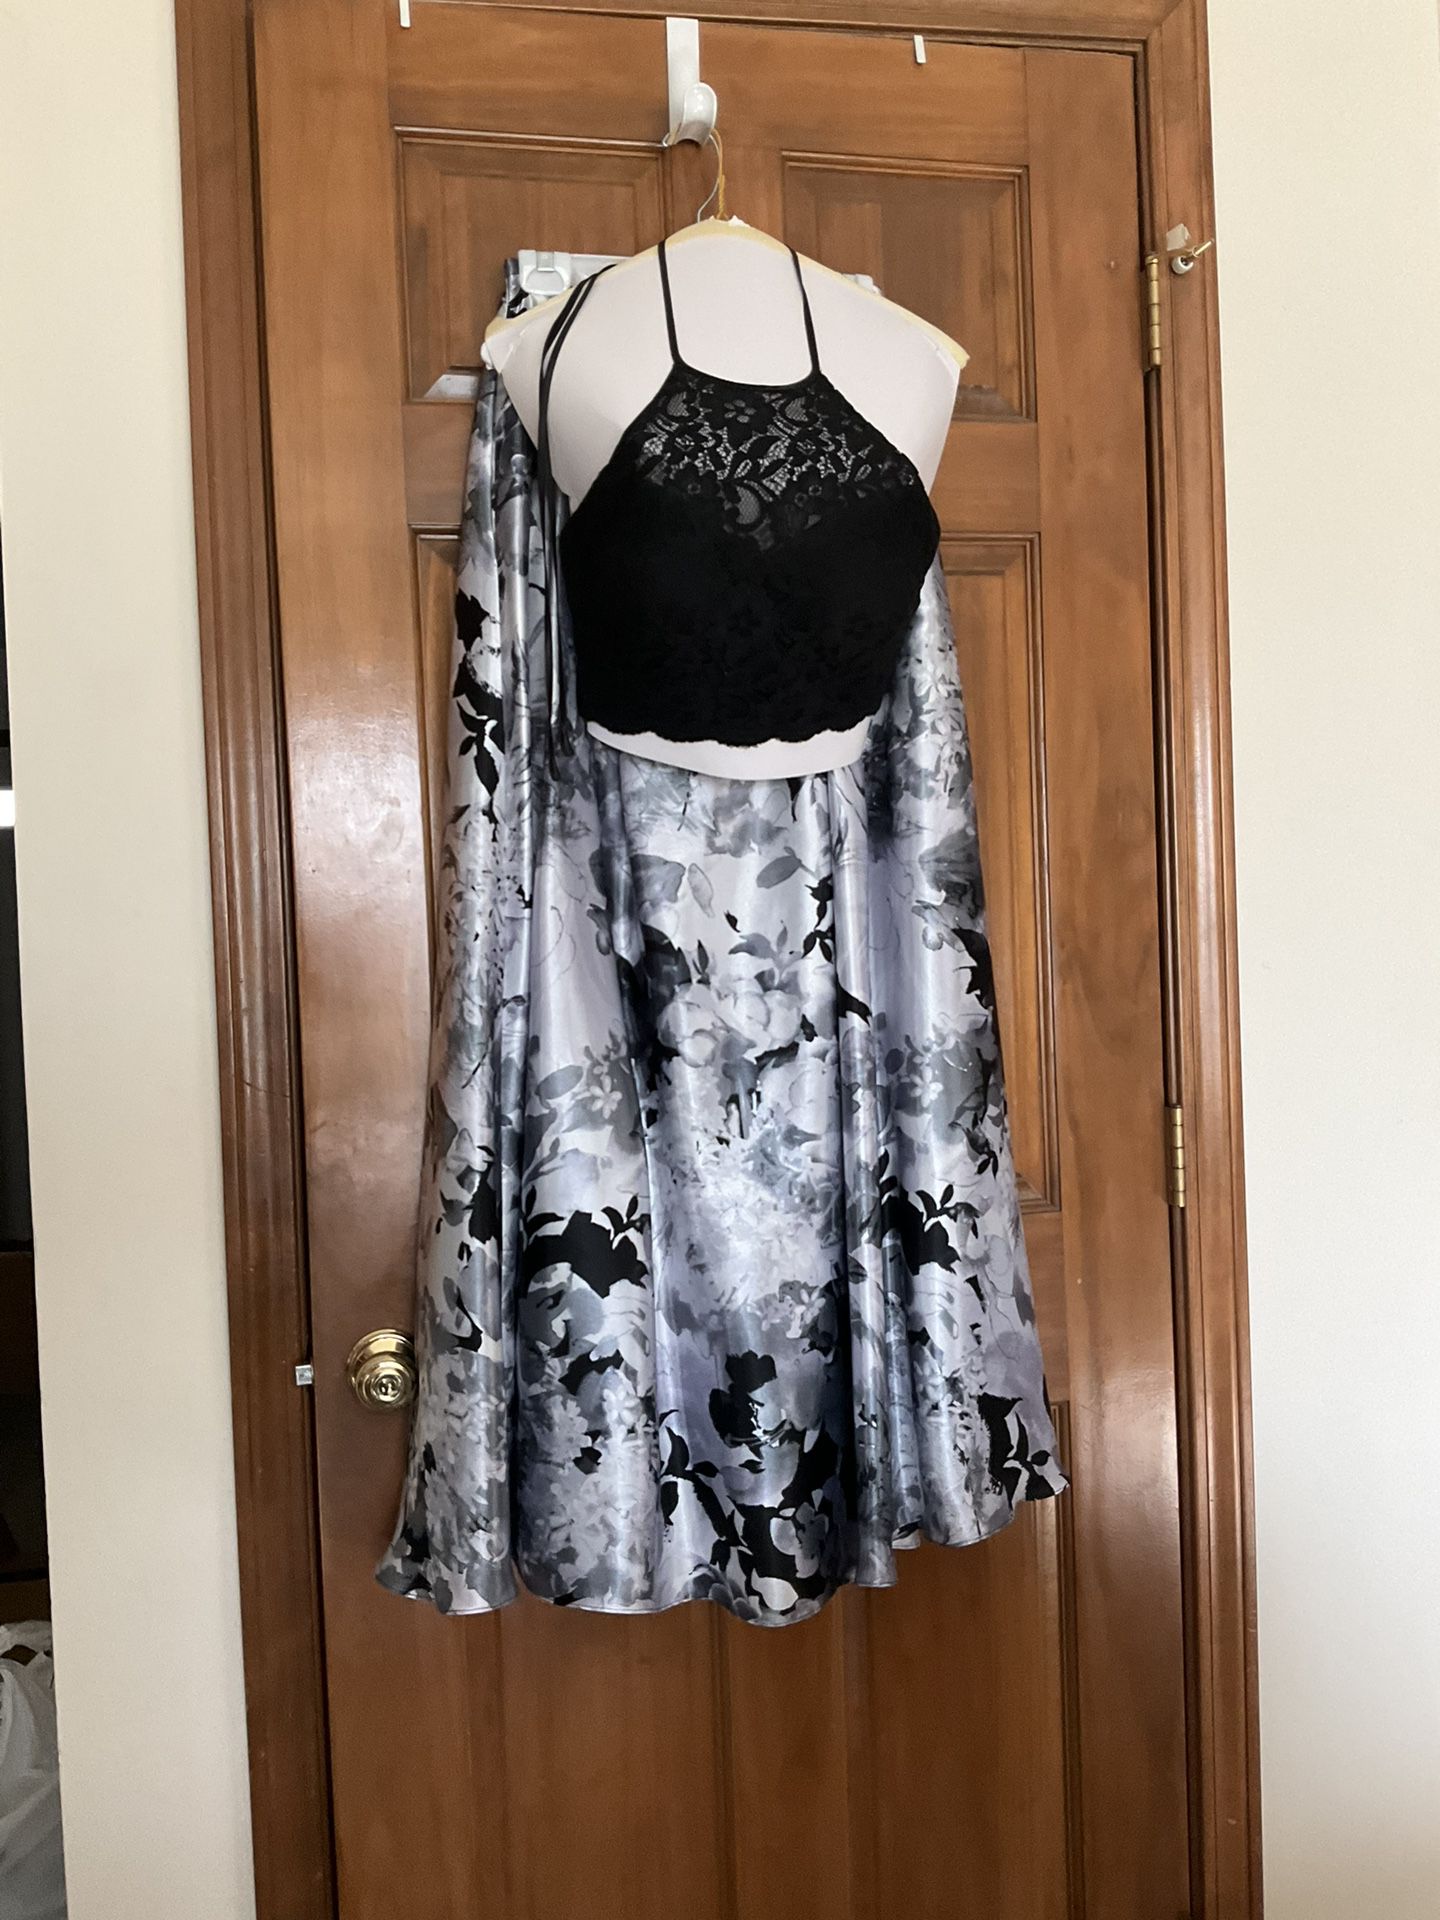 Two Piece Prom Dress Size 5 Worn Once By 5-4 Daughter. Cleaned And Ready To Wear.